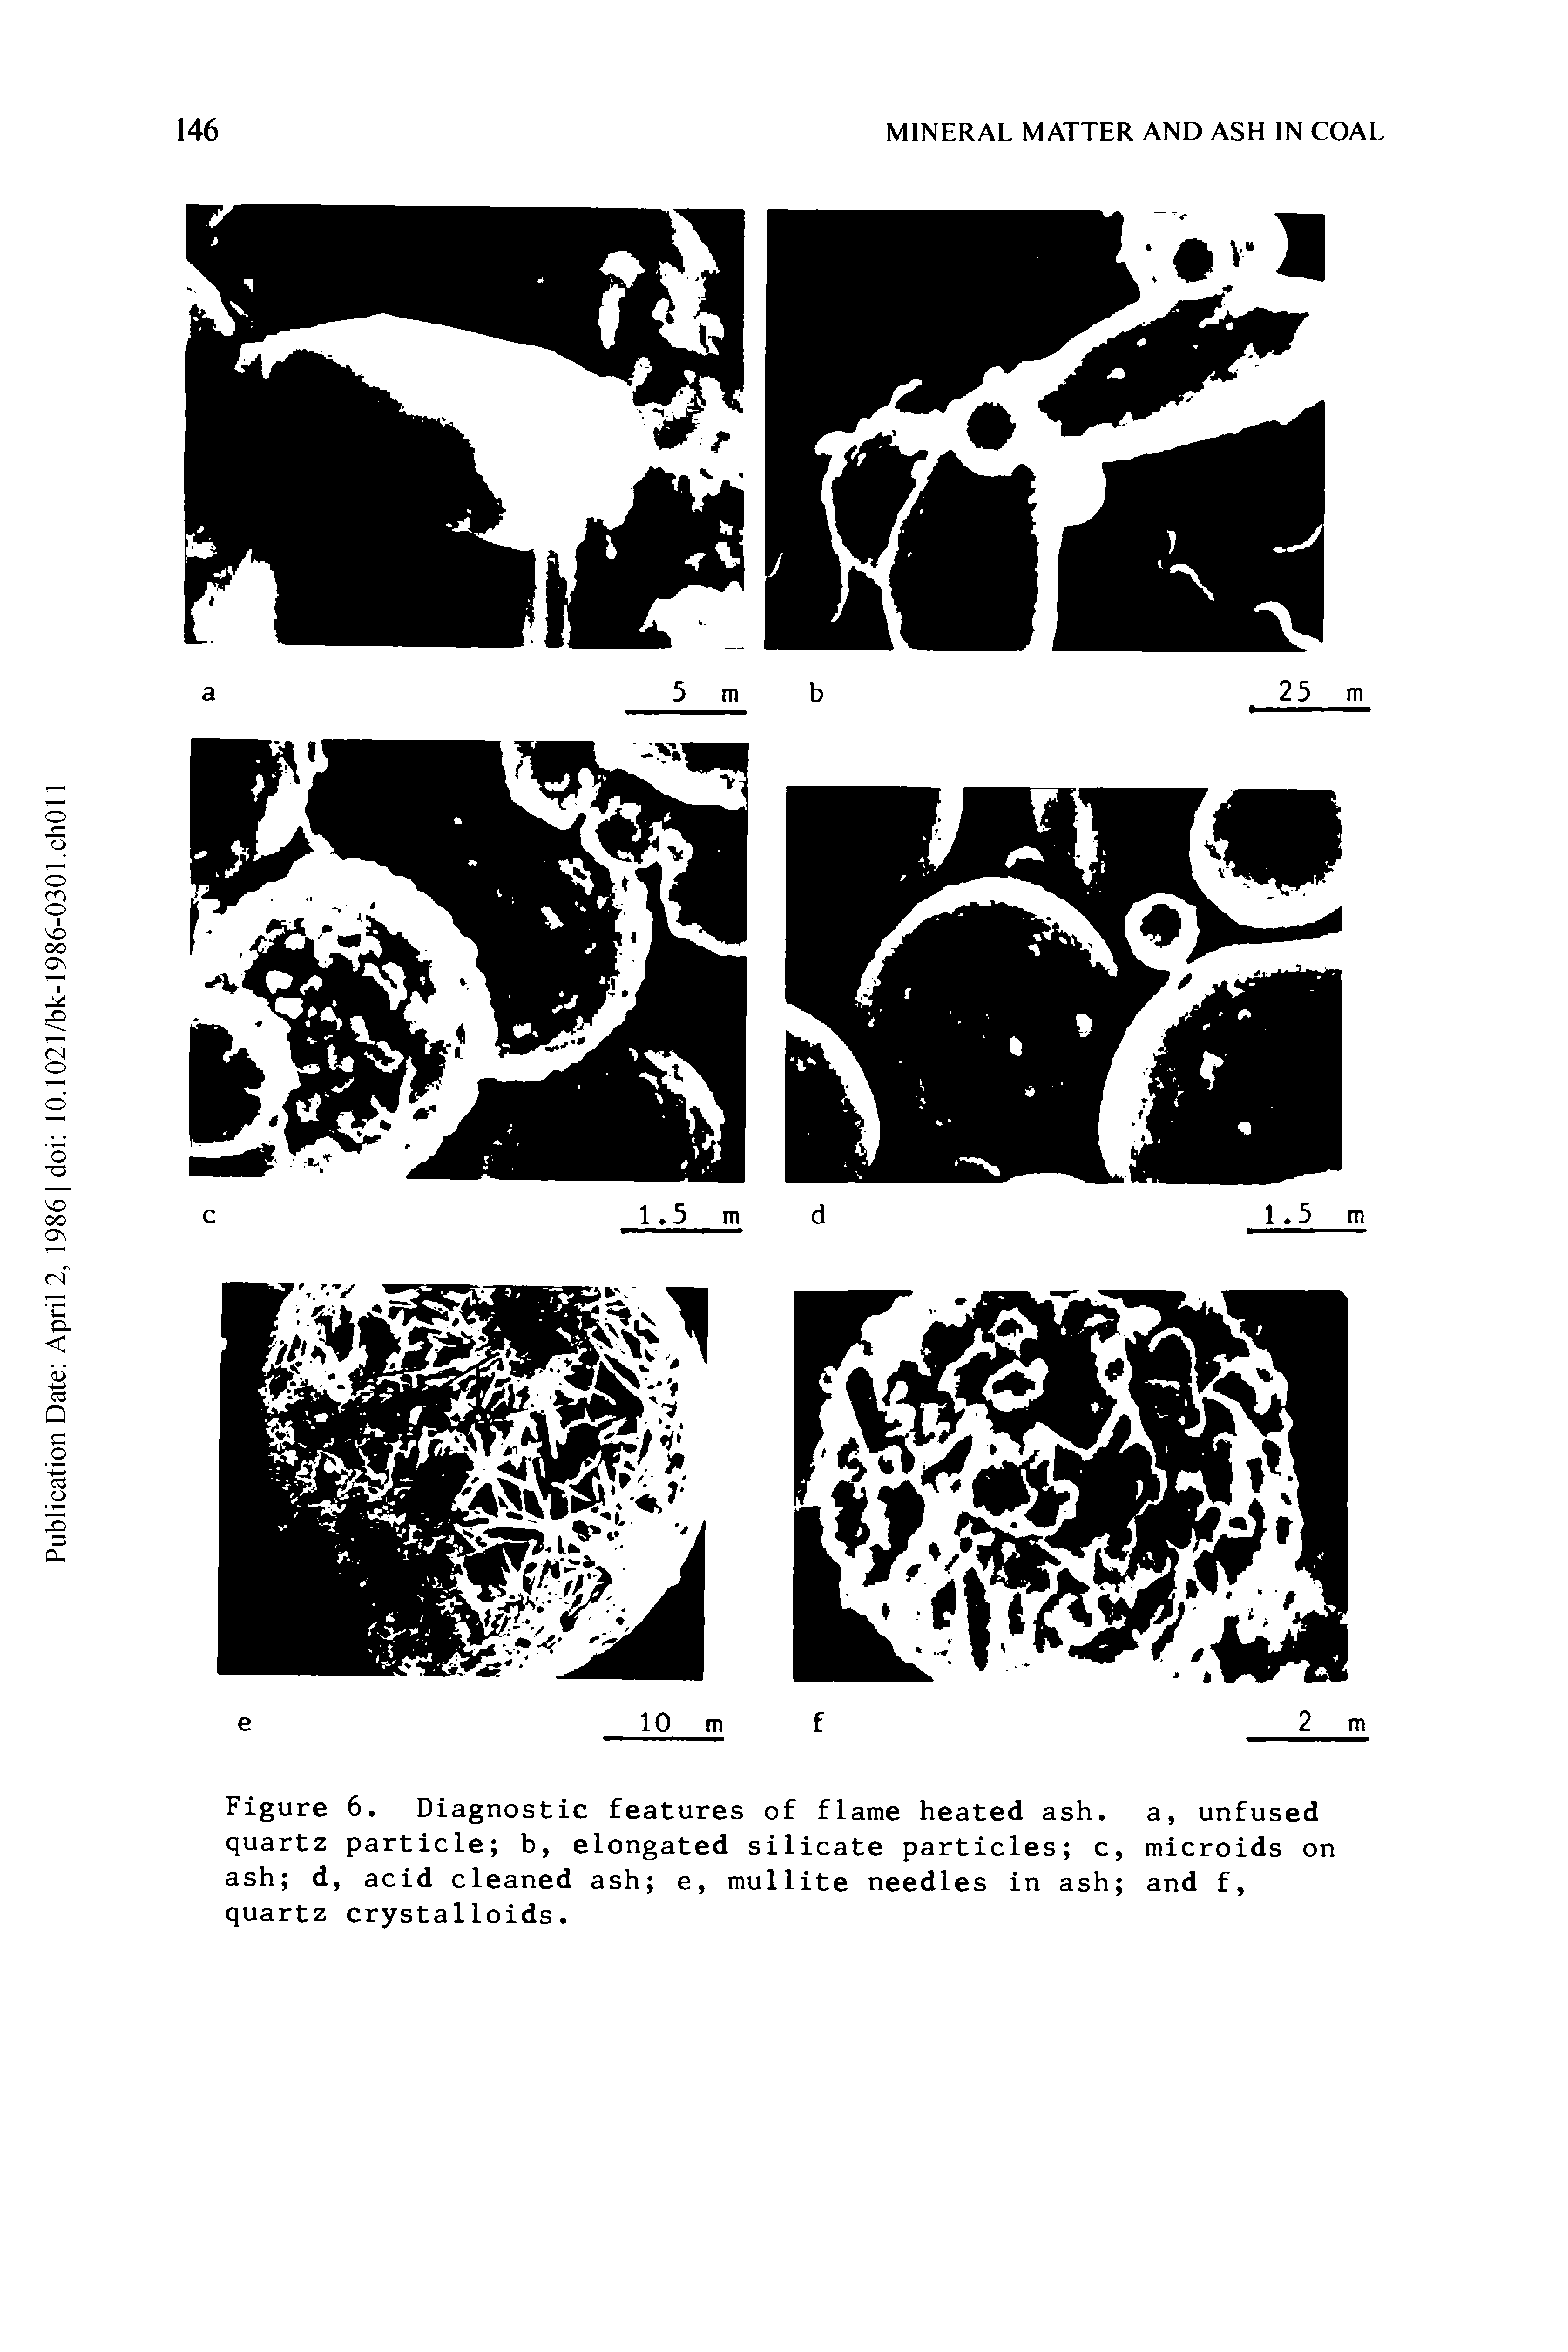 Figure 6. Diagnostic features of flame heated ash. a, unfused quartz particle b, elongated silicate particles c, microids on ash d, acid cleaned ash e, mullite needles in ash and f, quartz crystalloids.